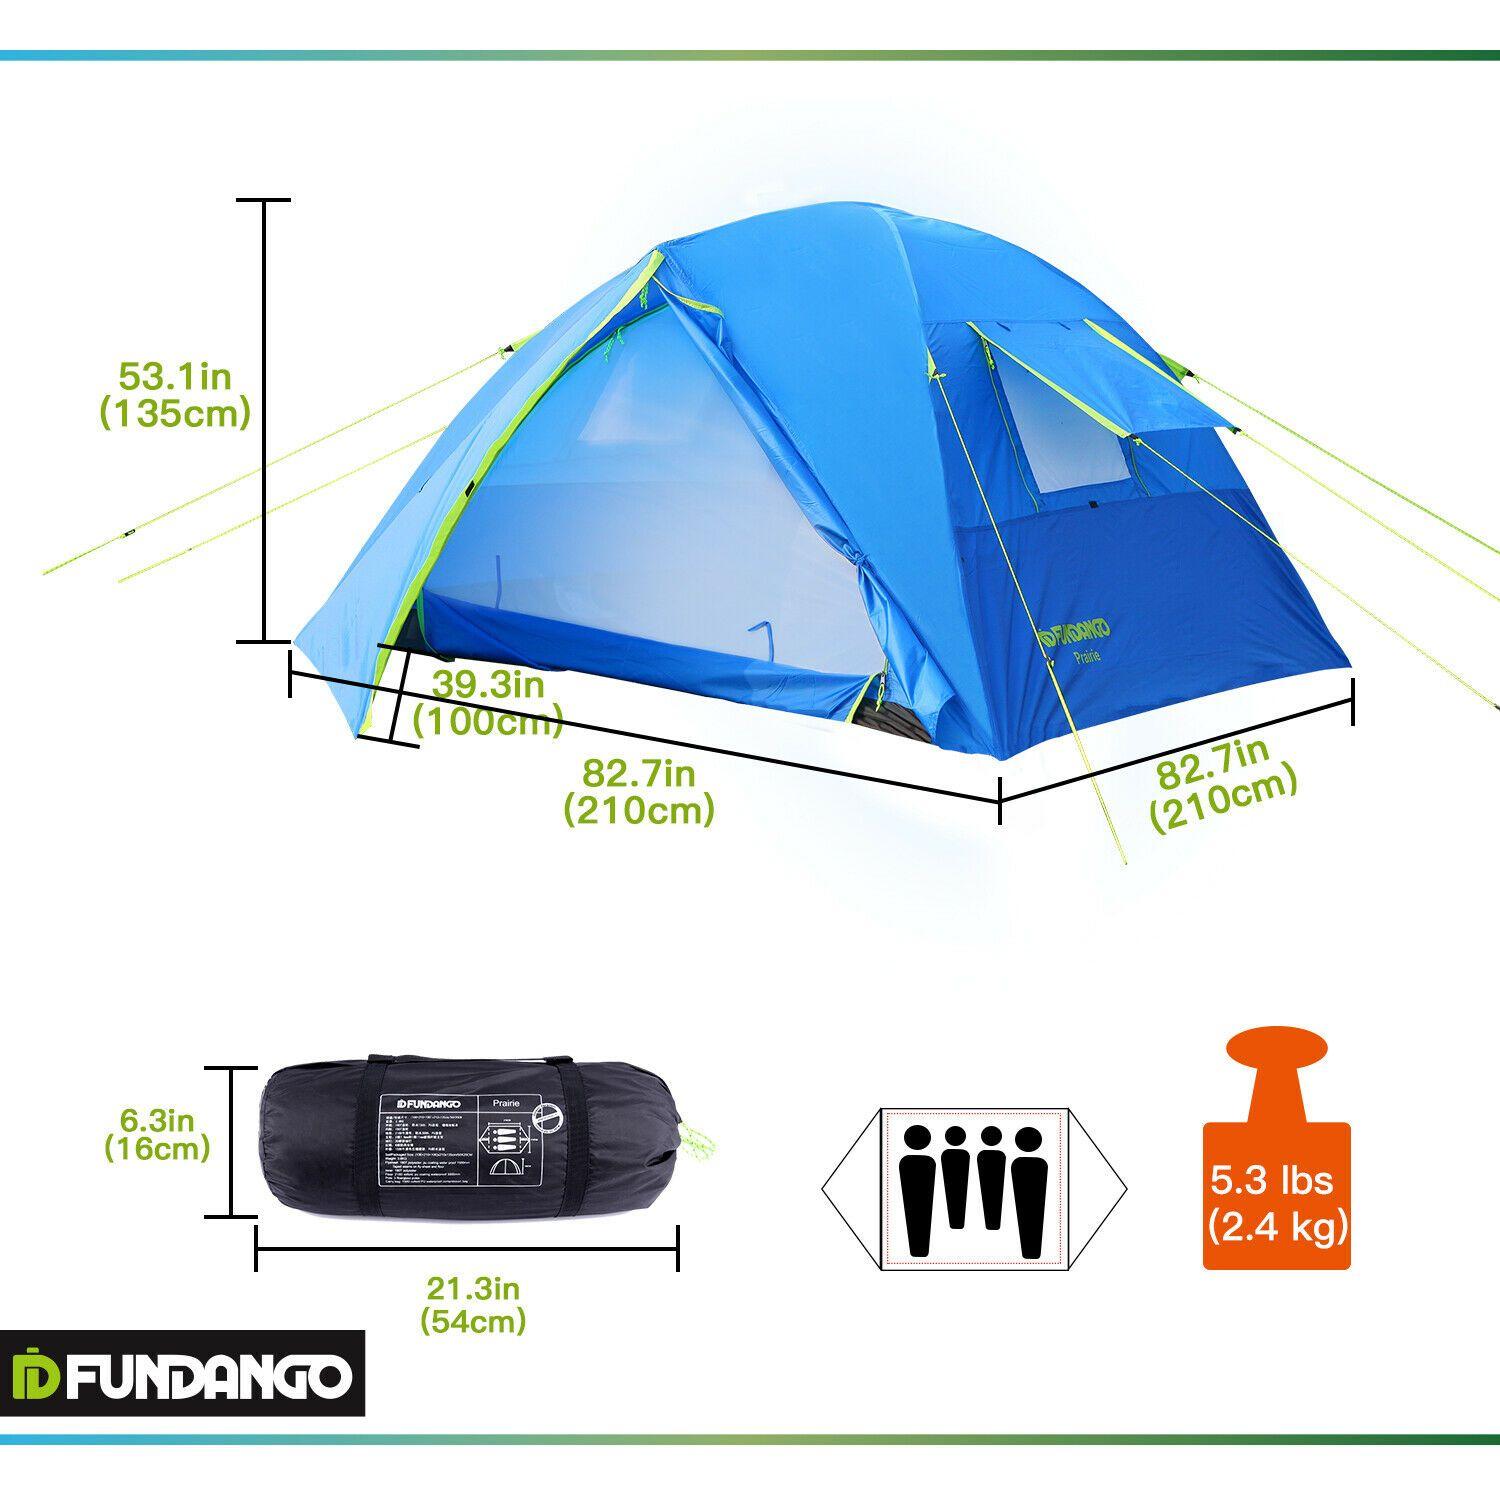 3 Blue Person Logo - FUNDANGO 3 Person Dome Camping Tent with Bag Blue and Gray Portable ...